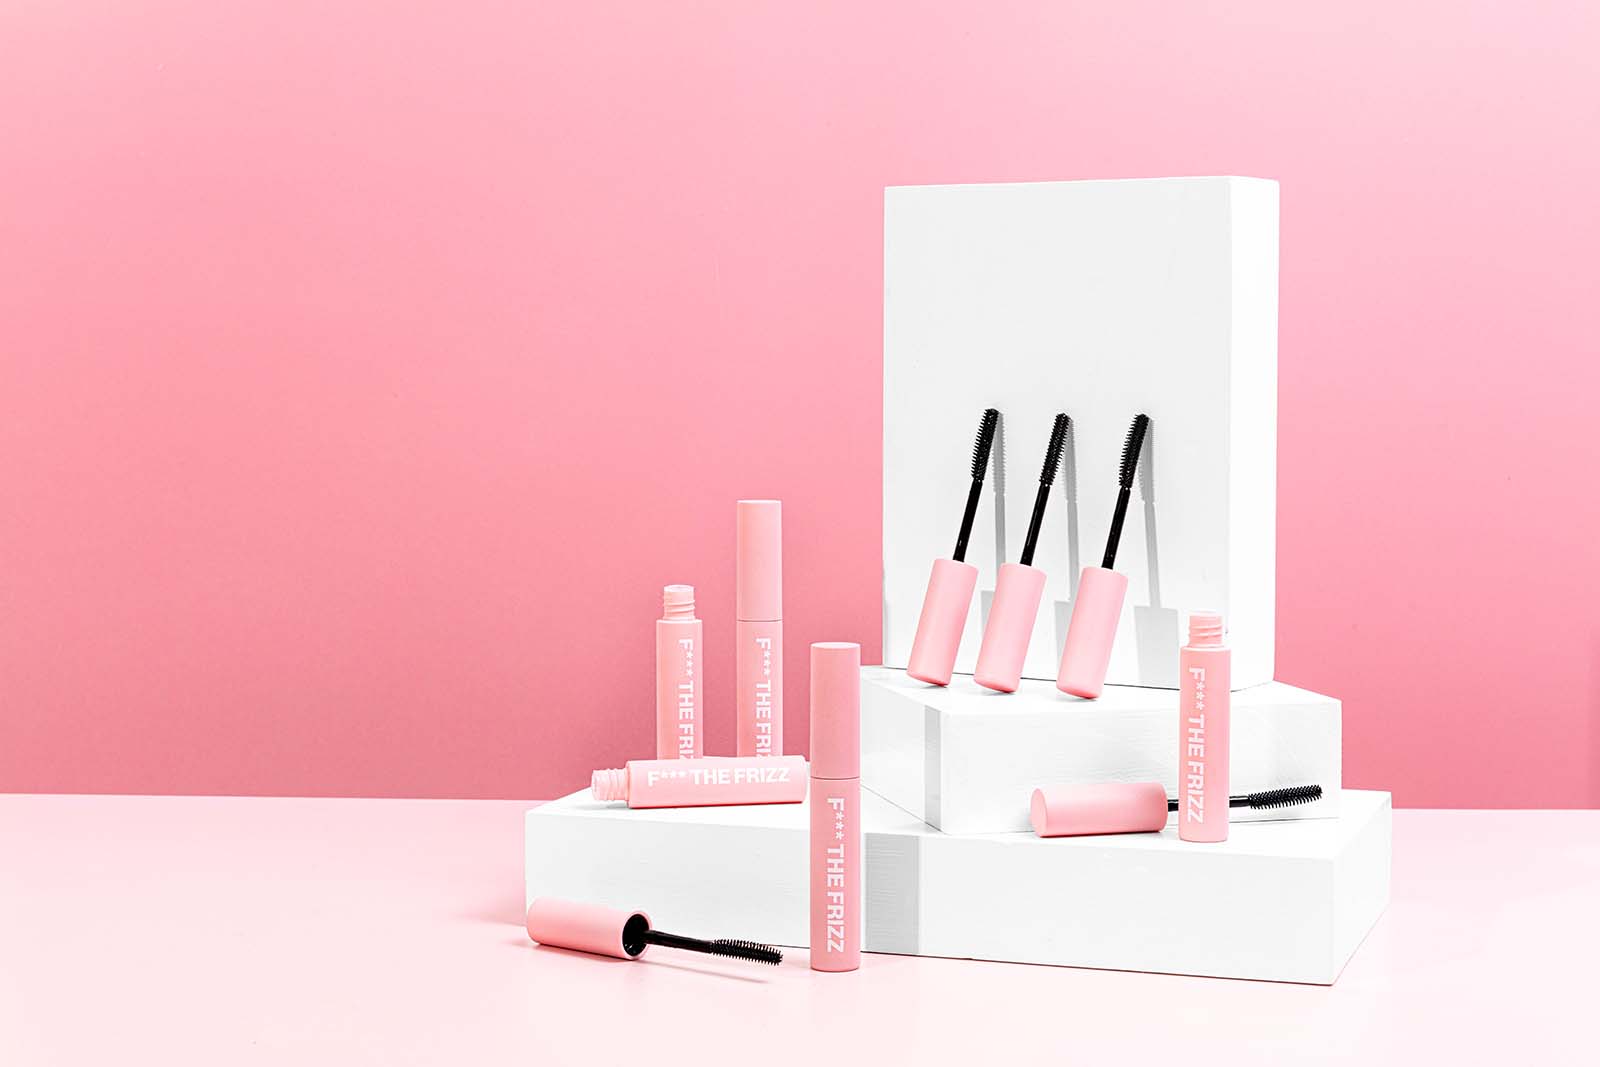 Simple Pink Product Photos for Anit Frizz Hair Wand. Styled content creation by Megzie Makes